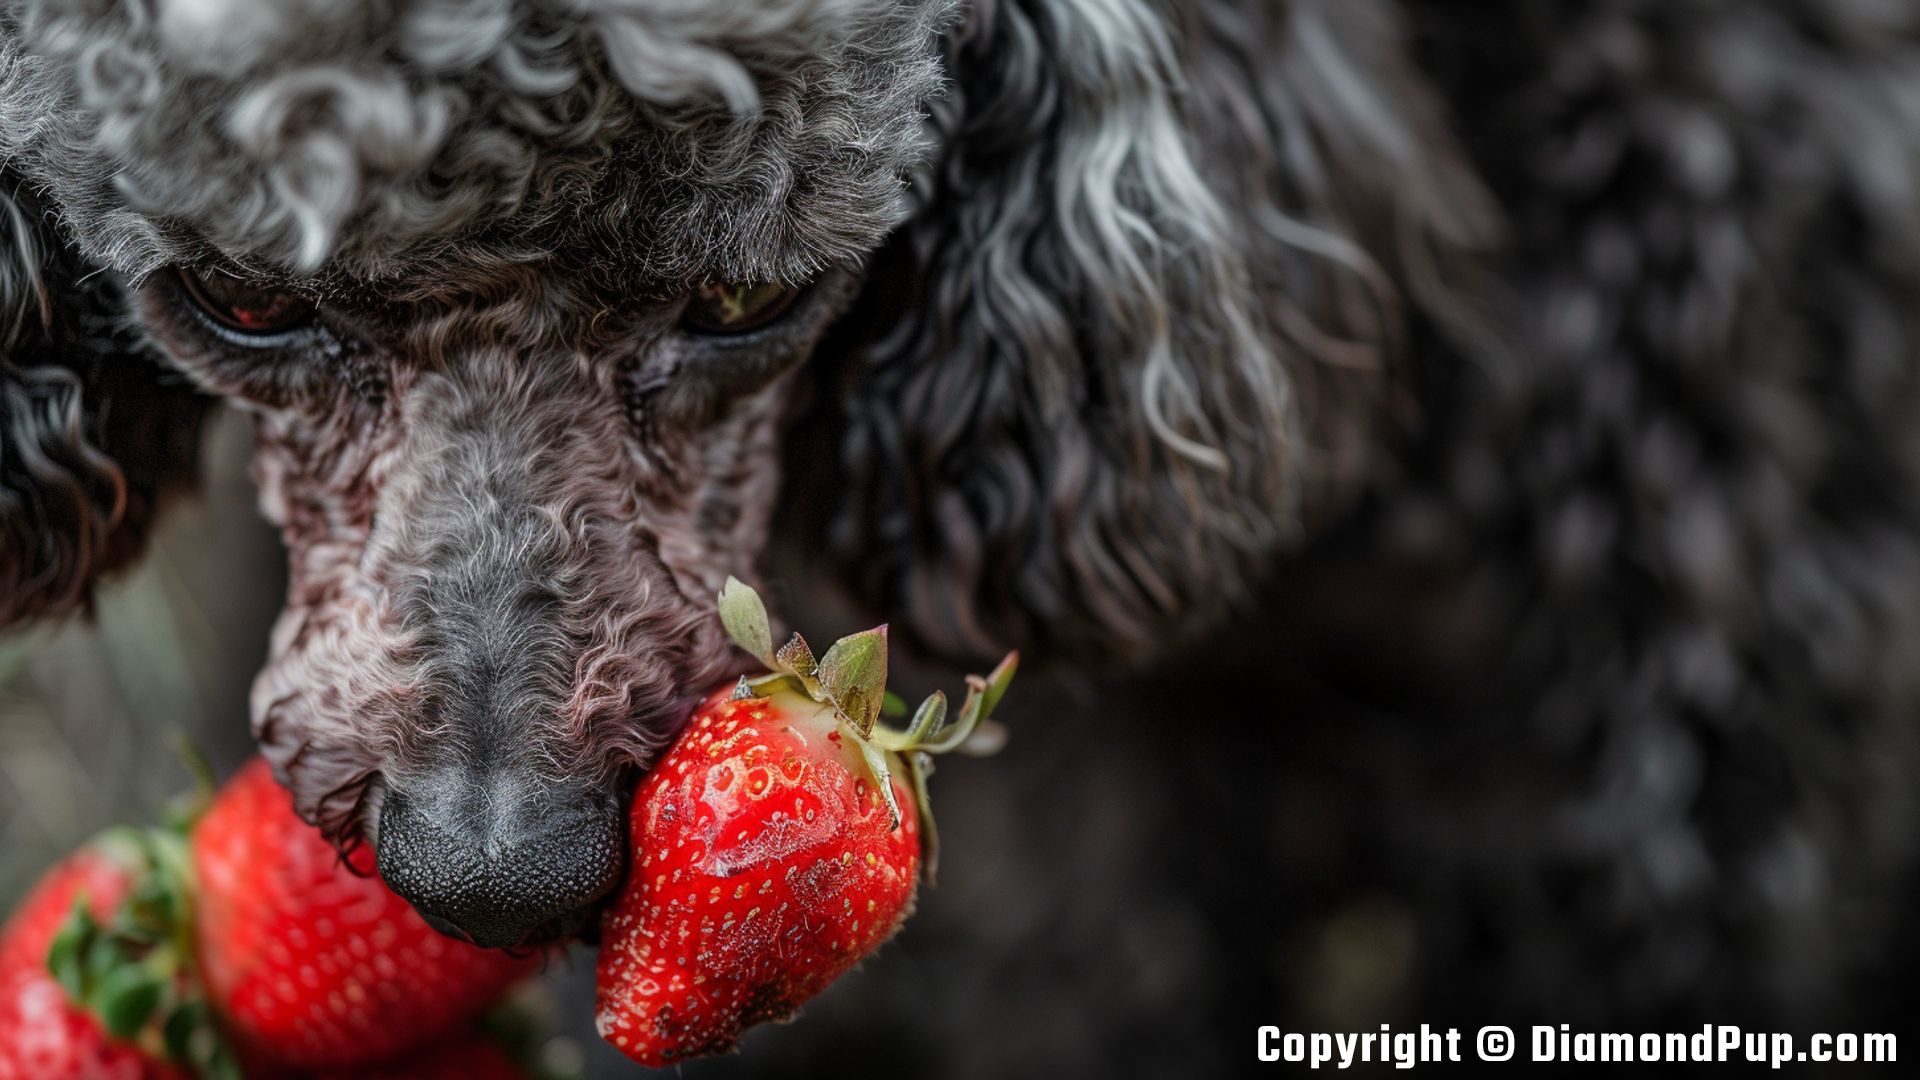 Picture of a Playful Poodle Eating Strawberries